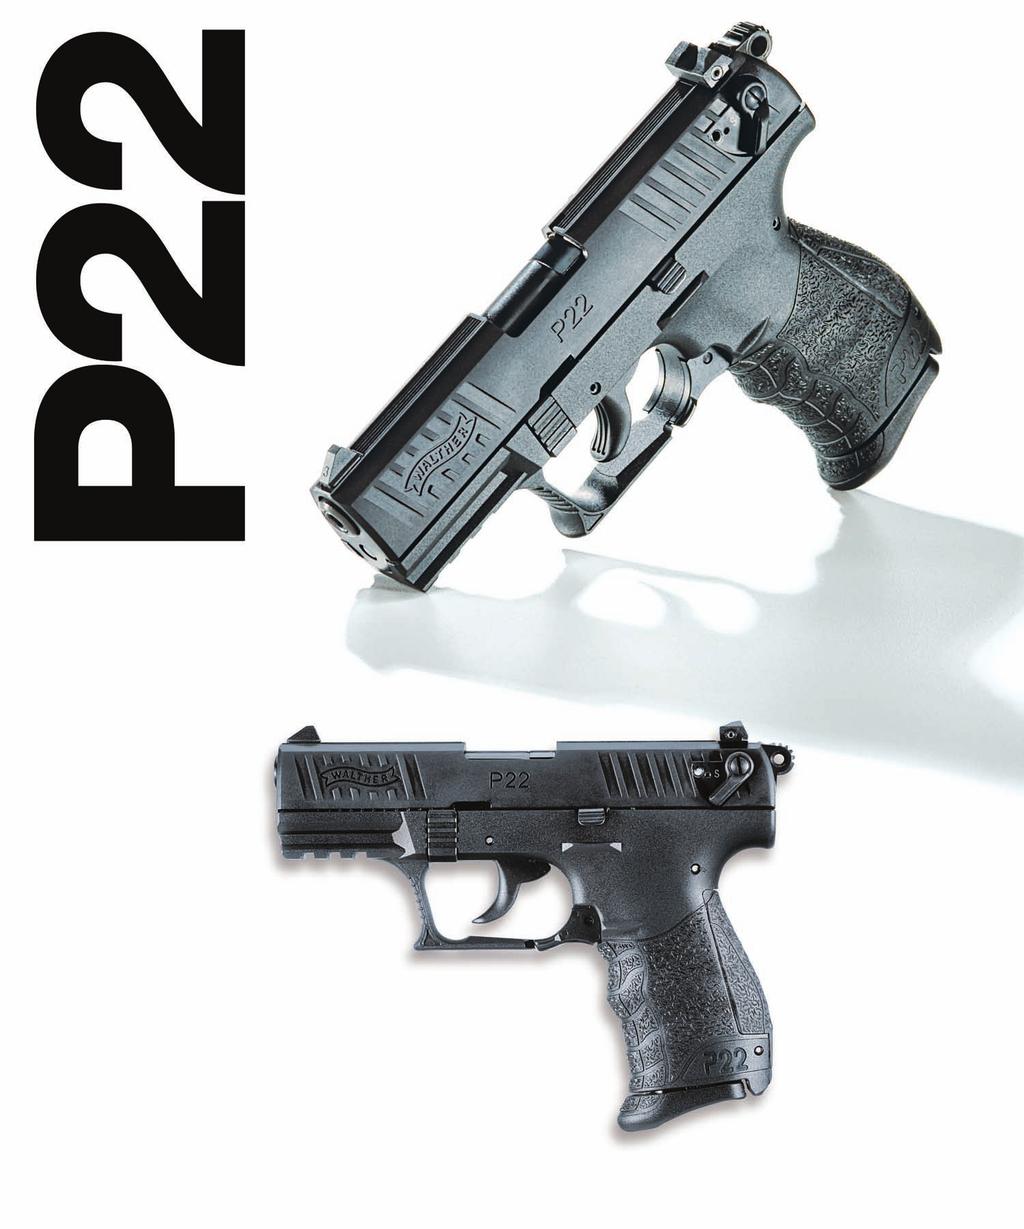 A versatile favorite among shooters for comfort and customization the compact P22 makes accessory changes feel instantaneous.